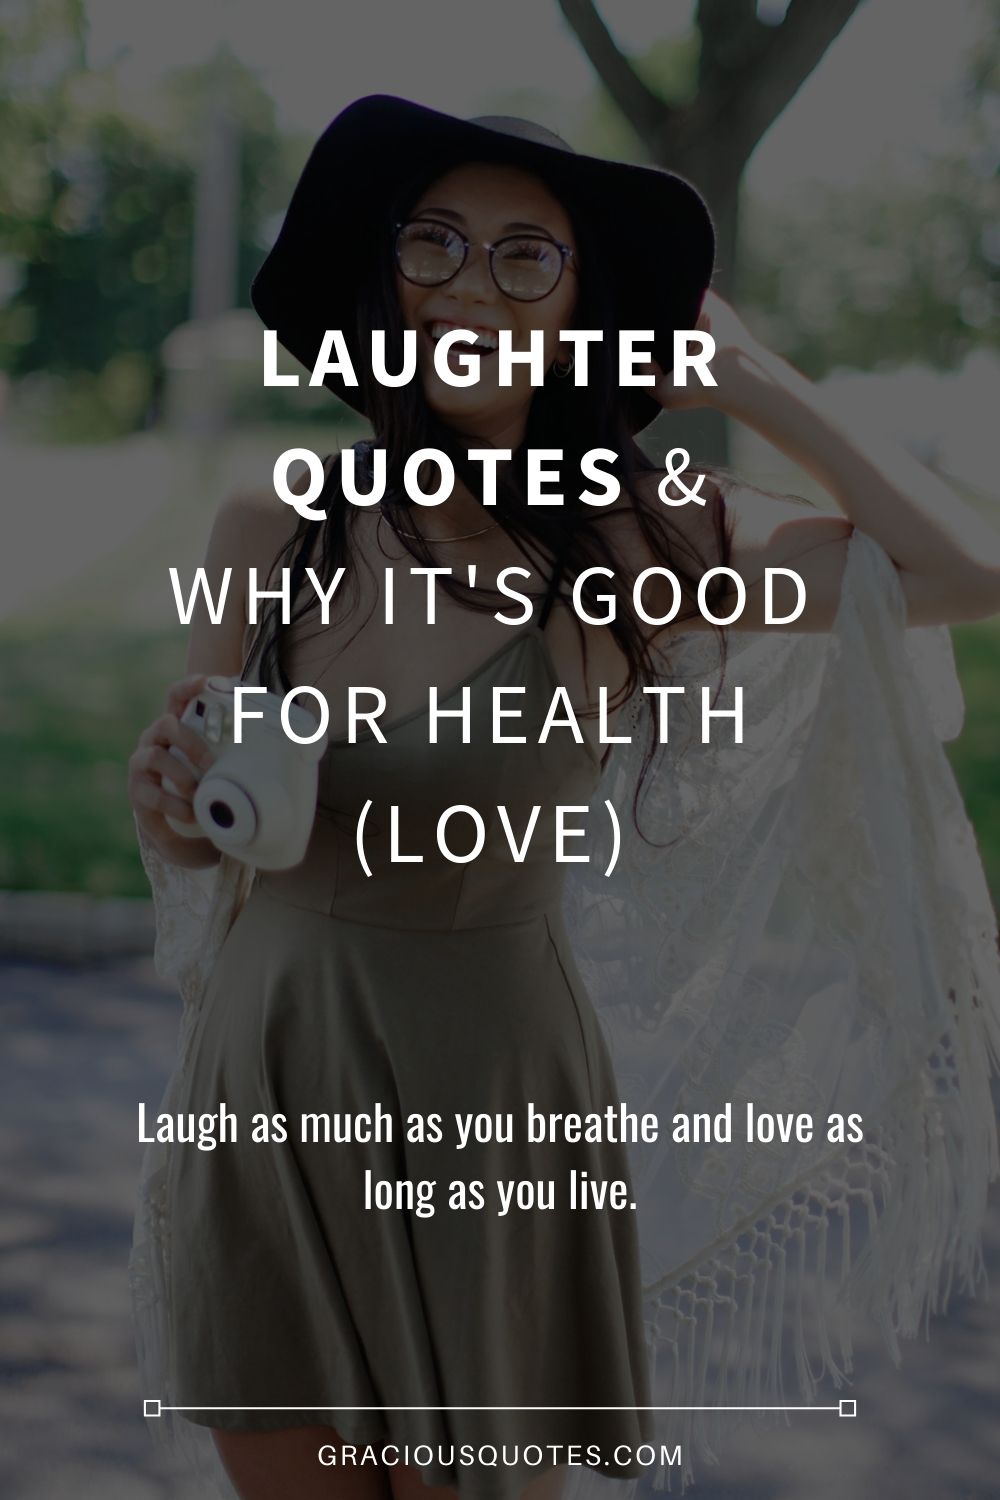 62 Laughter Quotes & Why It's Good for Health (LOVE)